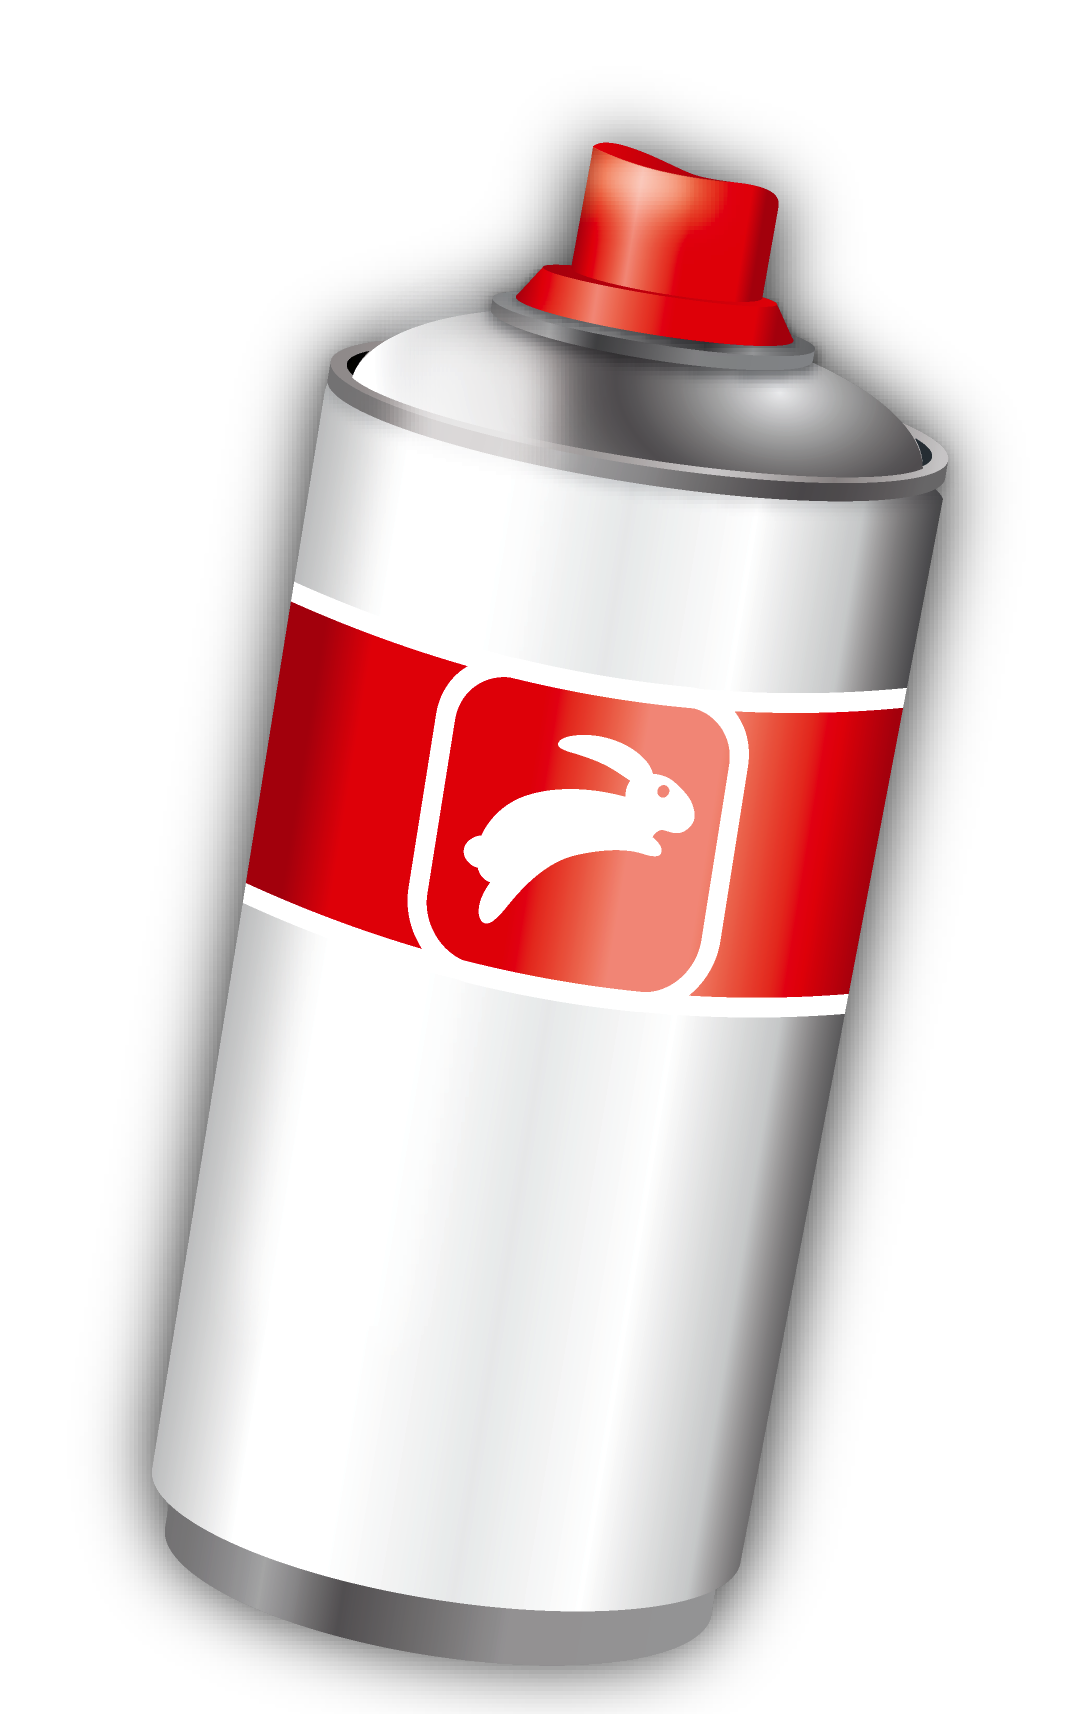 Spray Can Transparent PNG Pictures - Free Icons and PNG Backgrounds